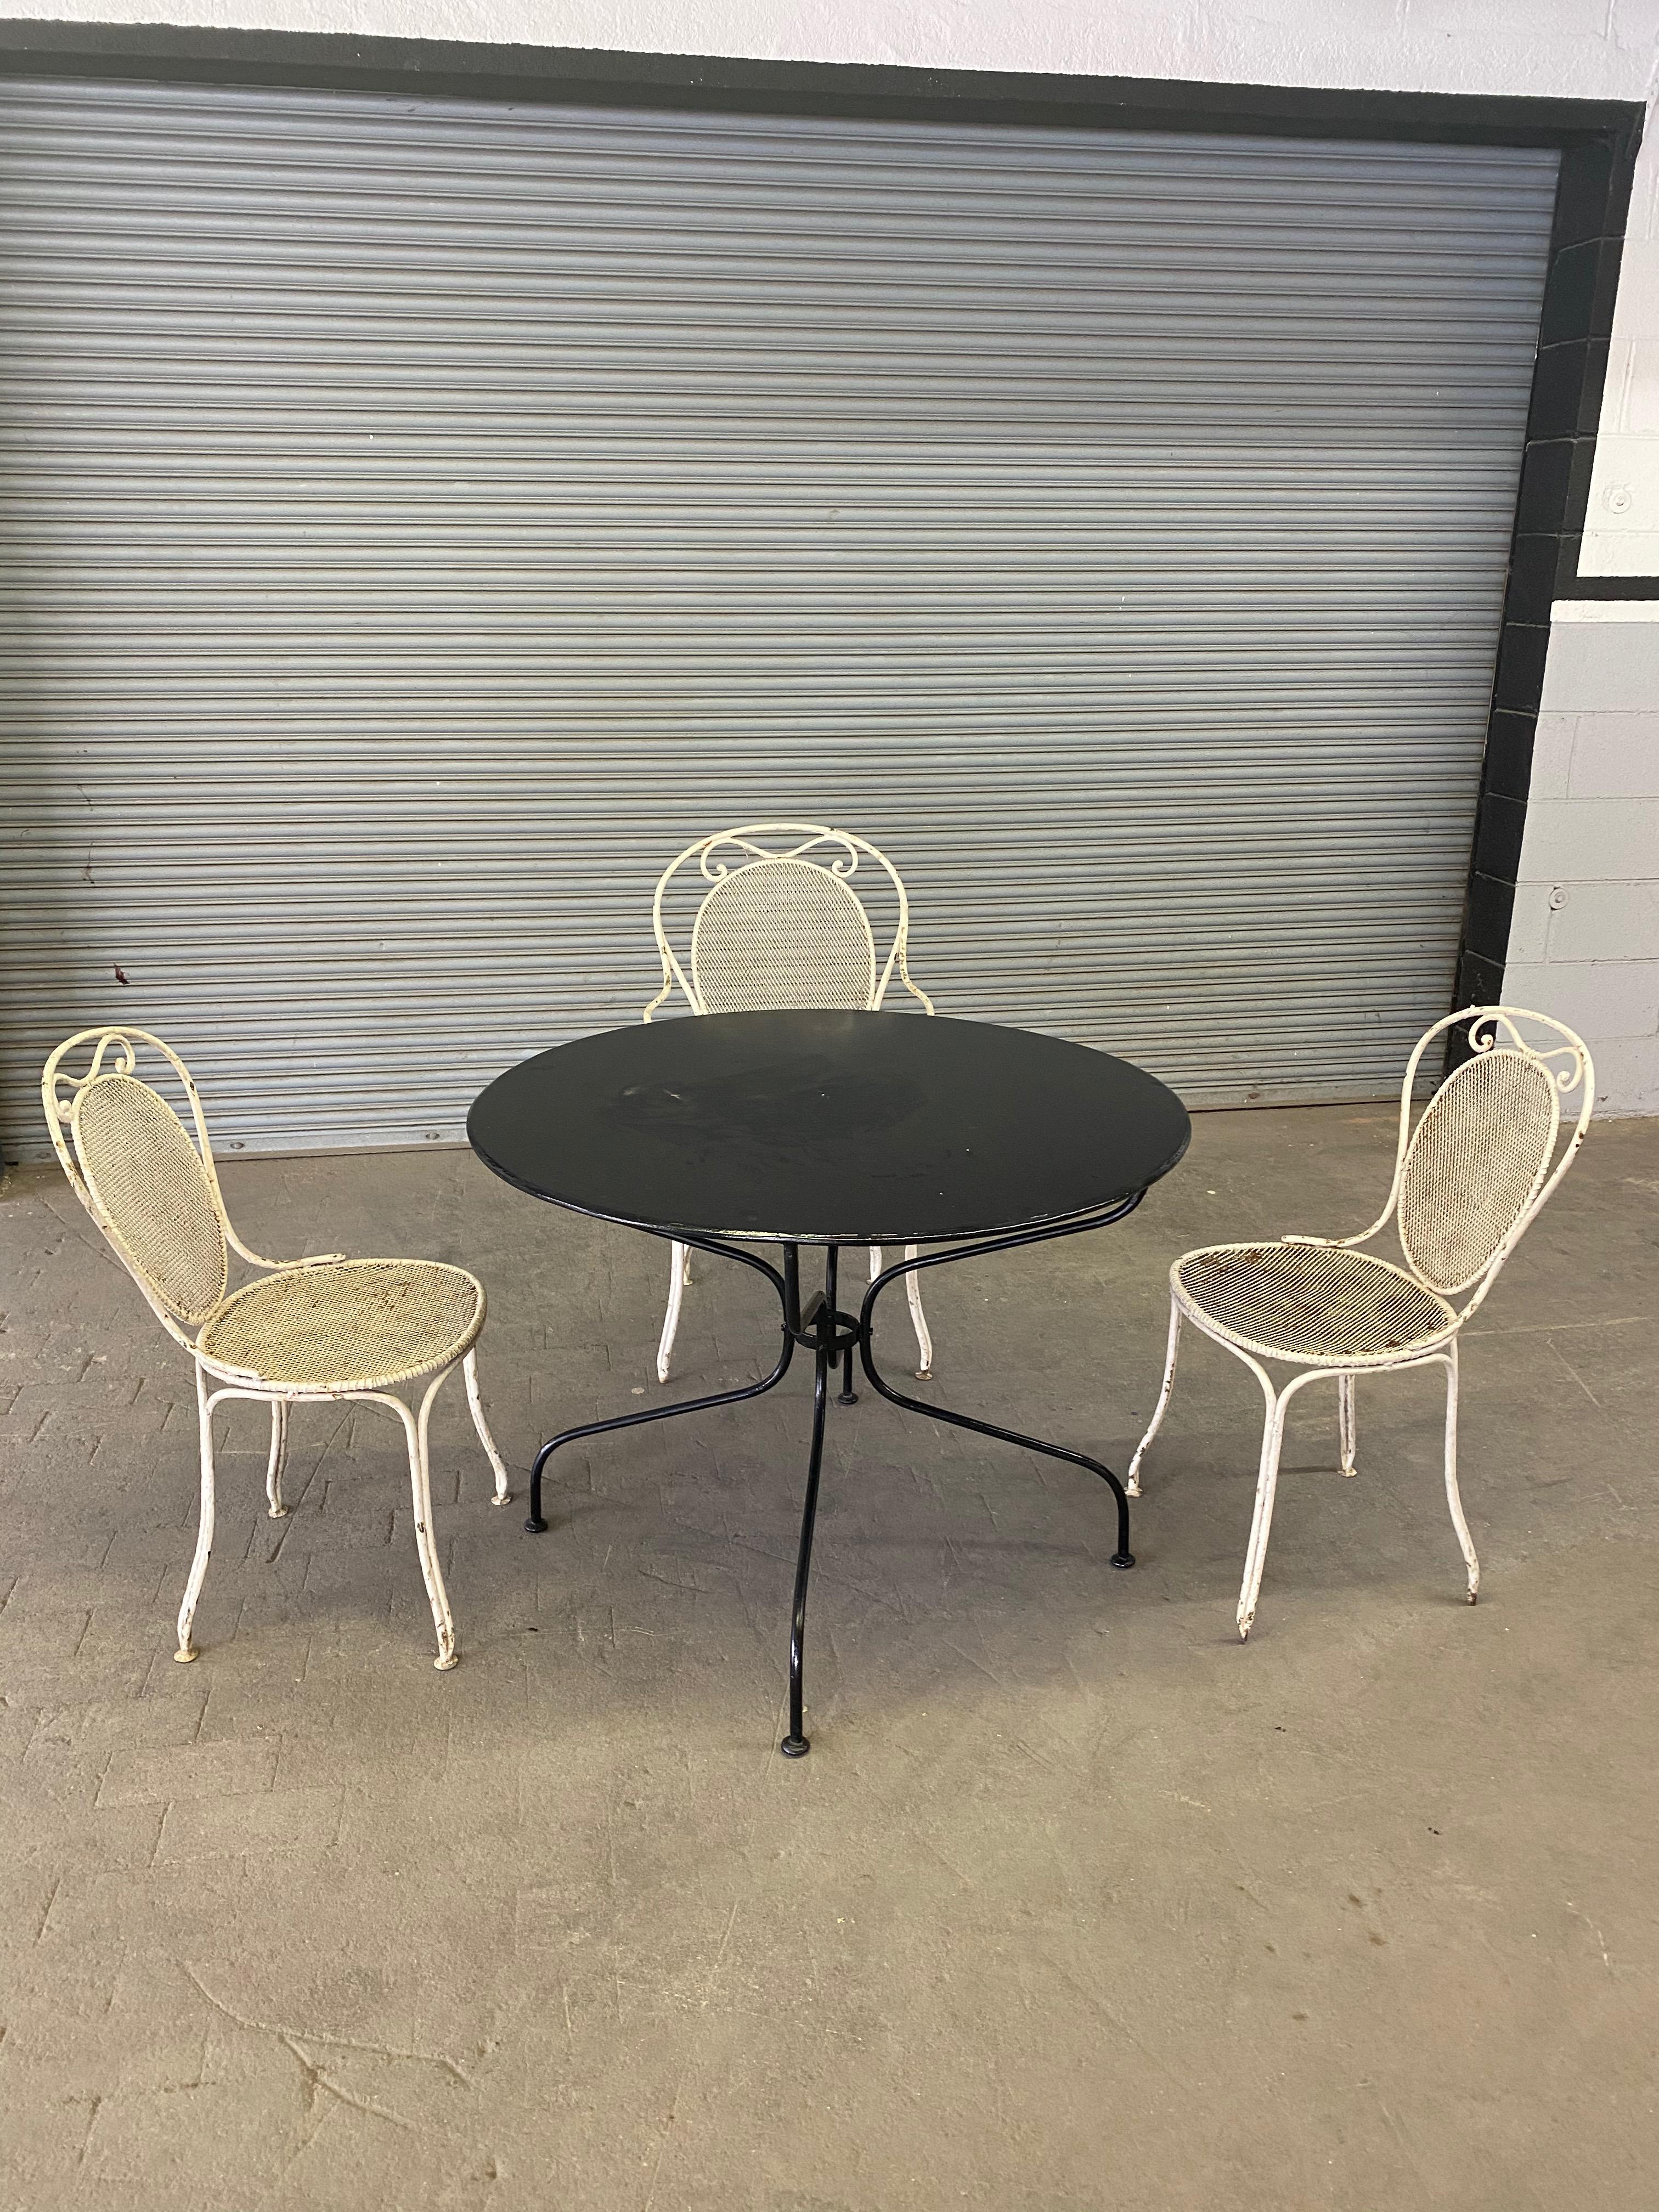 A set of seven French iron garden chairs in the original distressed paint finish. Consists of two armchairs and five side chairs. Sold as is. 

Measurements listed are for the side chairs. the dimensions for the armchairs are 37 H x 20.5 W x 21 D x